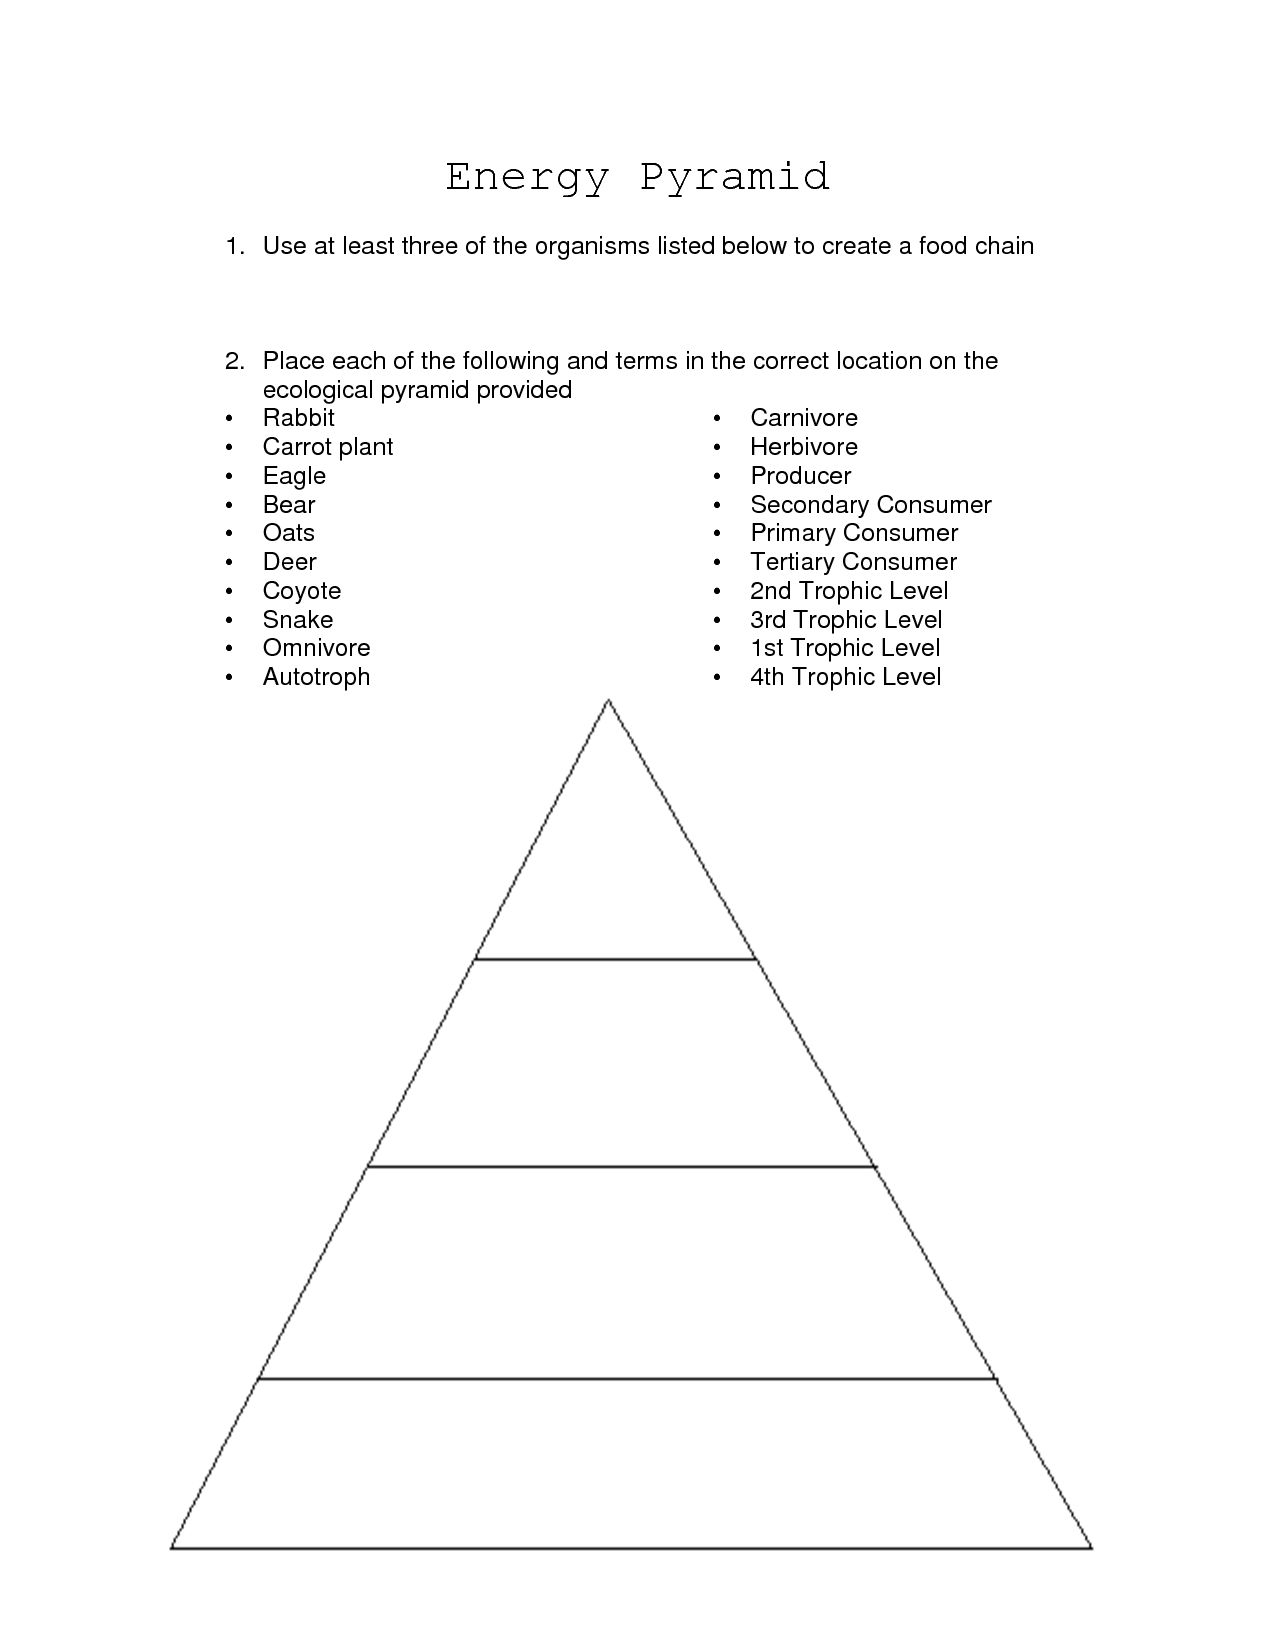 wolves-in-yellowstone-student-worksheet